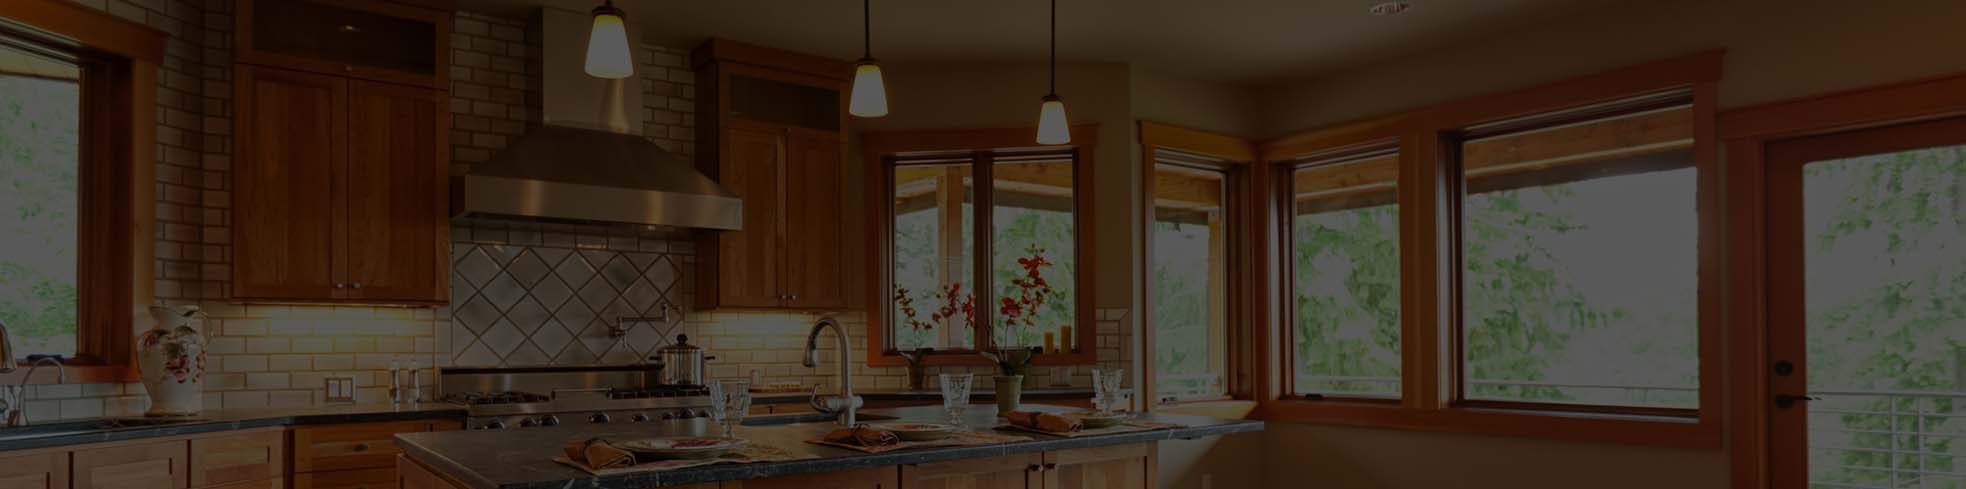 Expert installation for high quality, energy efficient windows 